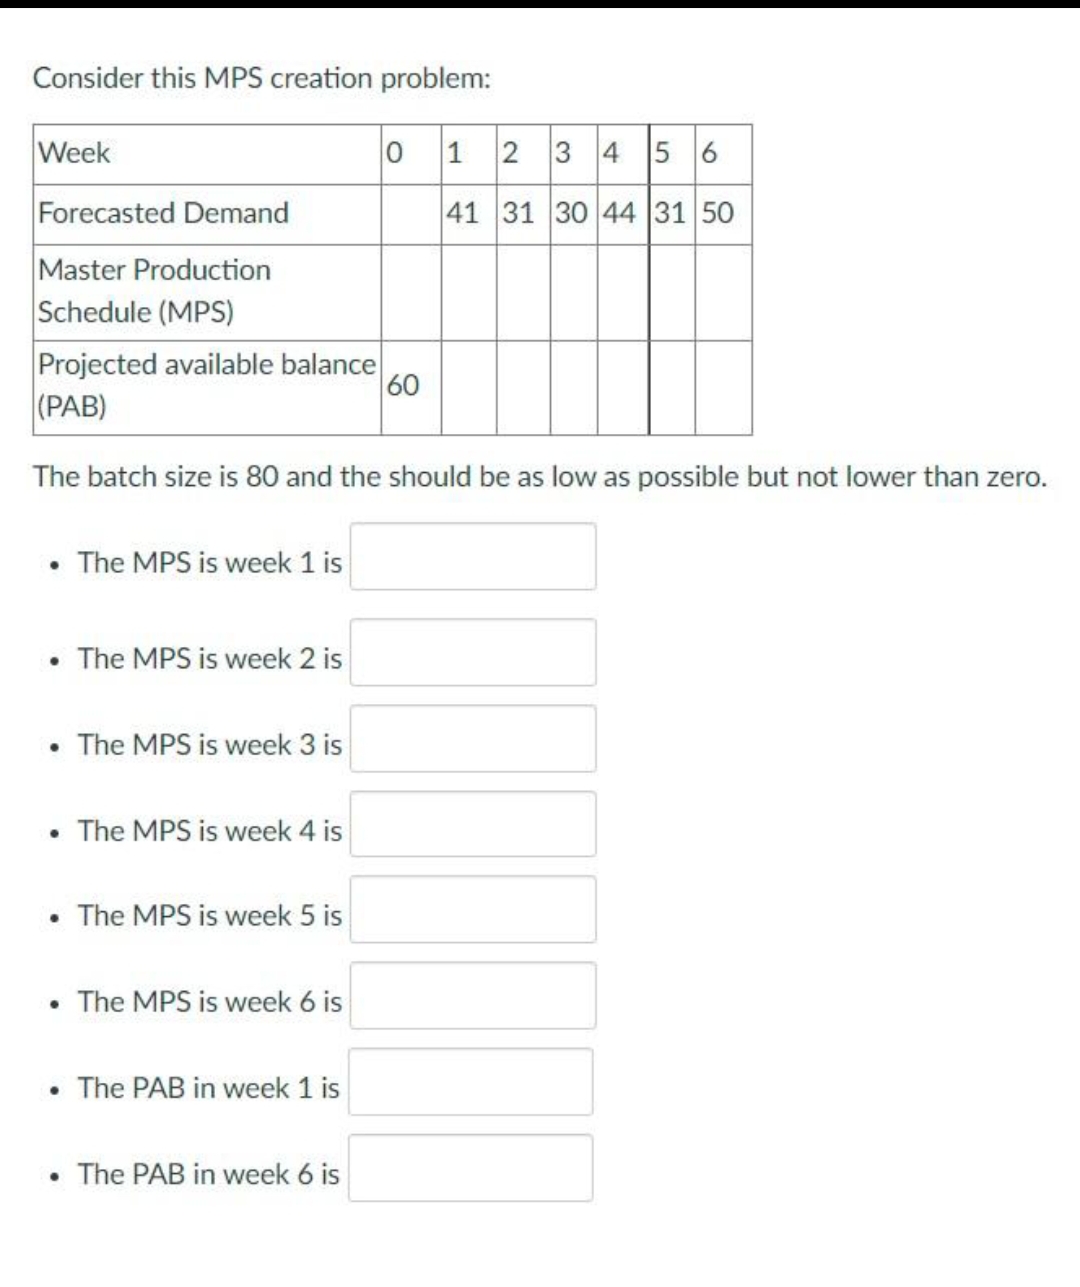 Consider this MPS creation problem:
Week
Forecasted Demand
Master Production
Schedule (MPS)
Projected available balance
(PAB)
The batch size is 80 and the should be as low as possible but not lower than zero.
The MPS is week 1 is
• The MPS is week 2 is
The MPS is week 3 is
• The MPS is week 4 is
The MPS is week 5 is
• The MPS is week 6 is
• The PAB in week 1 is
0 1 2 3 4 5 6
41 31 30 44 31 50
The PAB in week 6 is
60